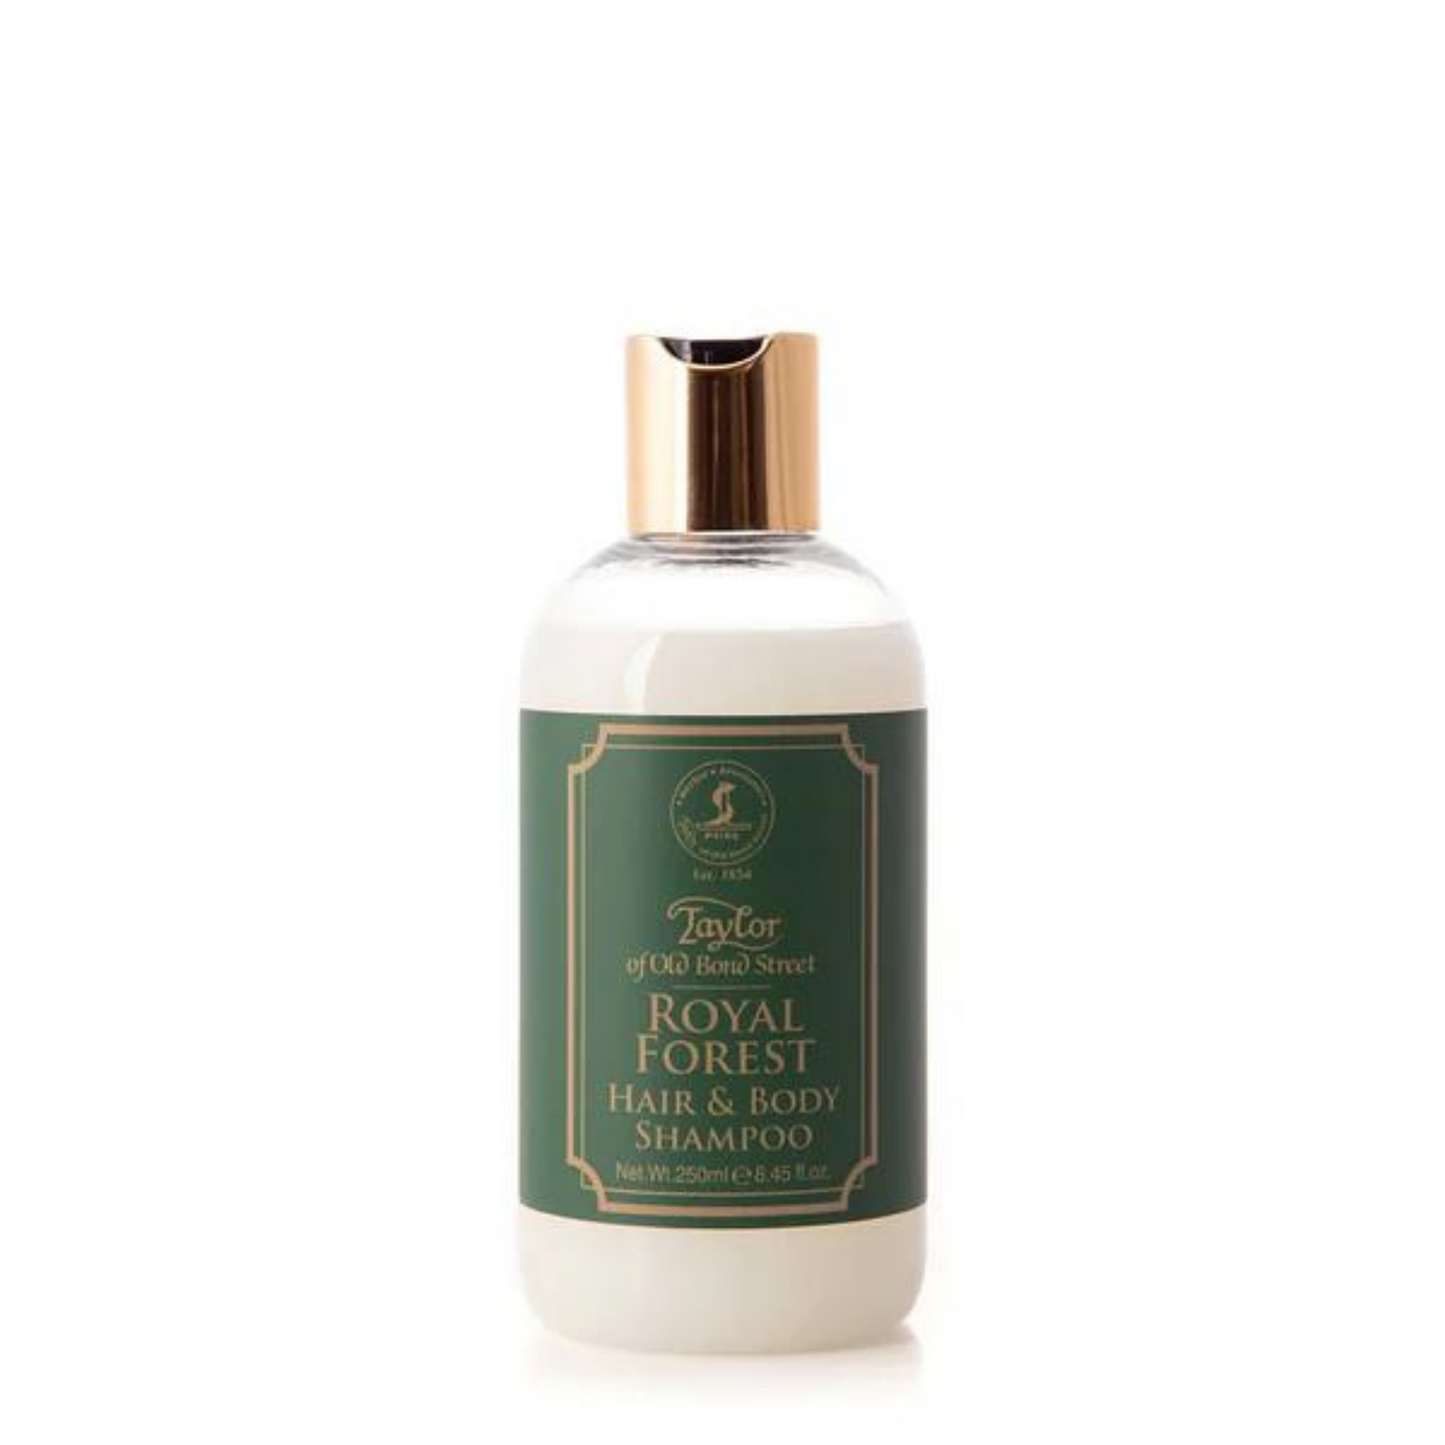 Primary Image of Royal Forest Hair and Body Shampoo